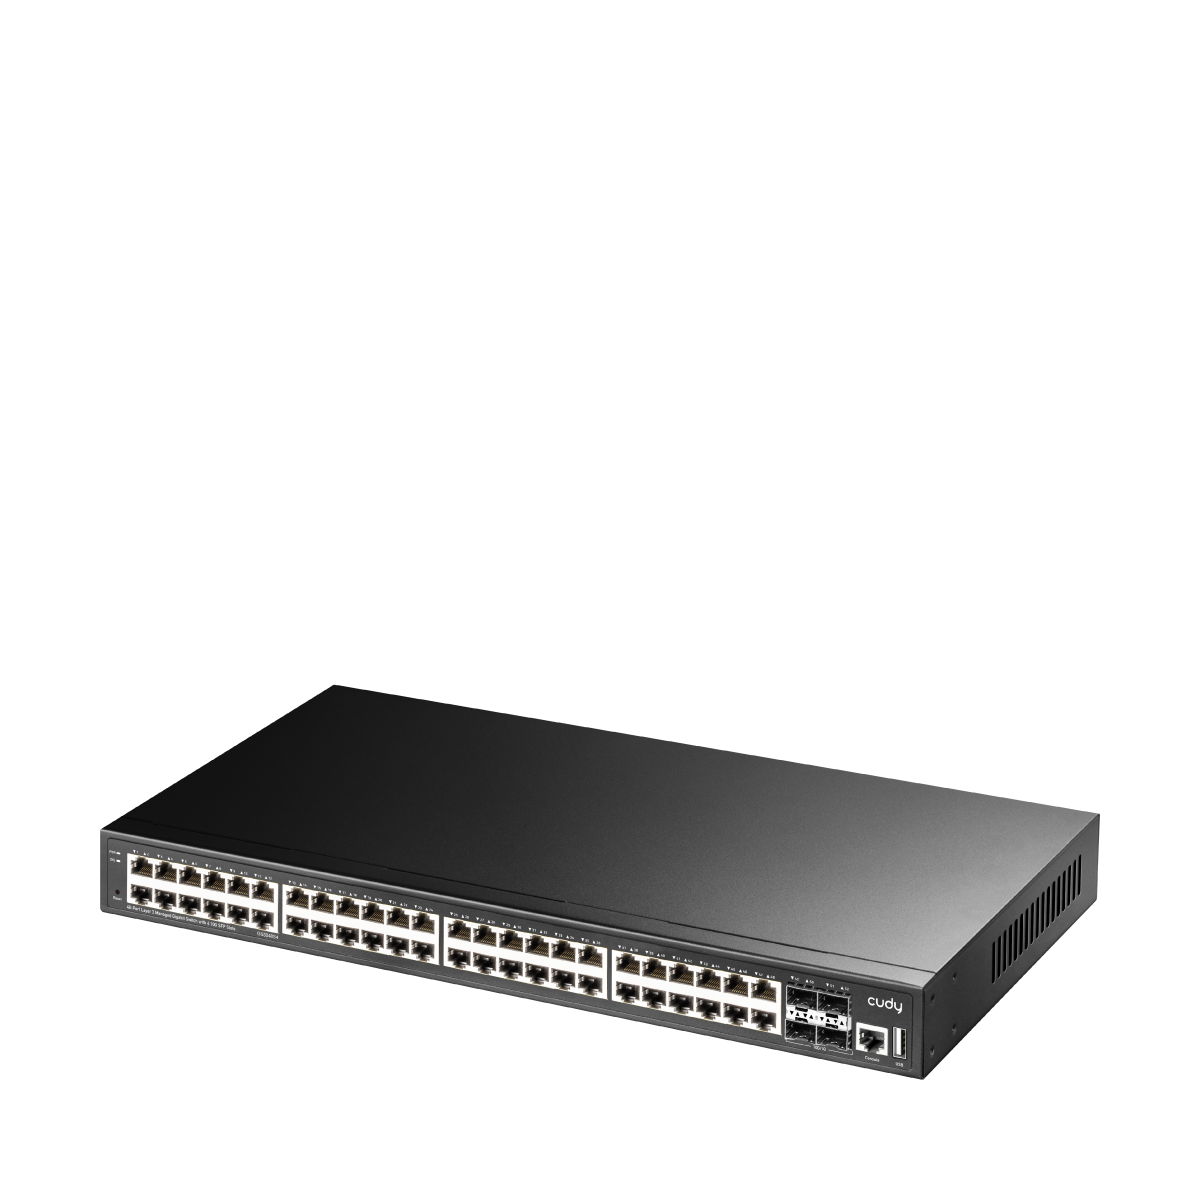 48-GbE 4-SFP+ L3 Managed Gigabit Switch, GS5048S4 1.0